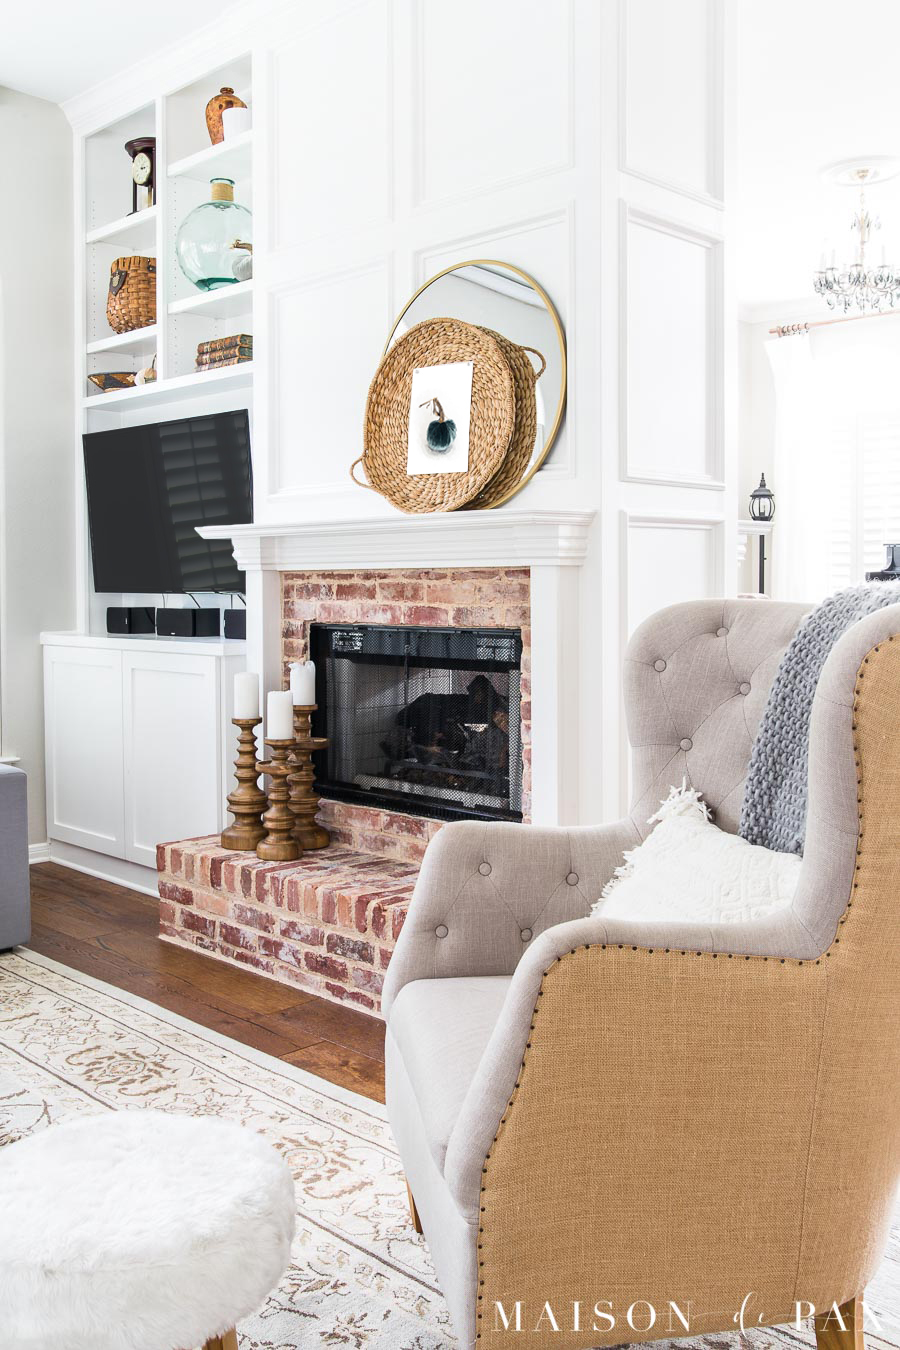 A neutral armchair in the corner of a room beside a fireplace.